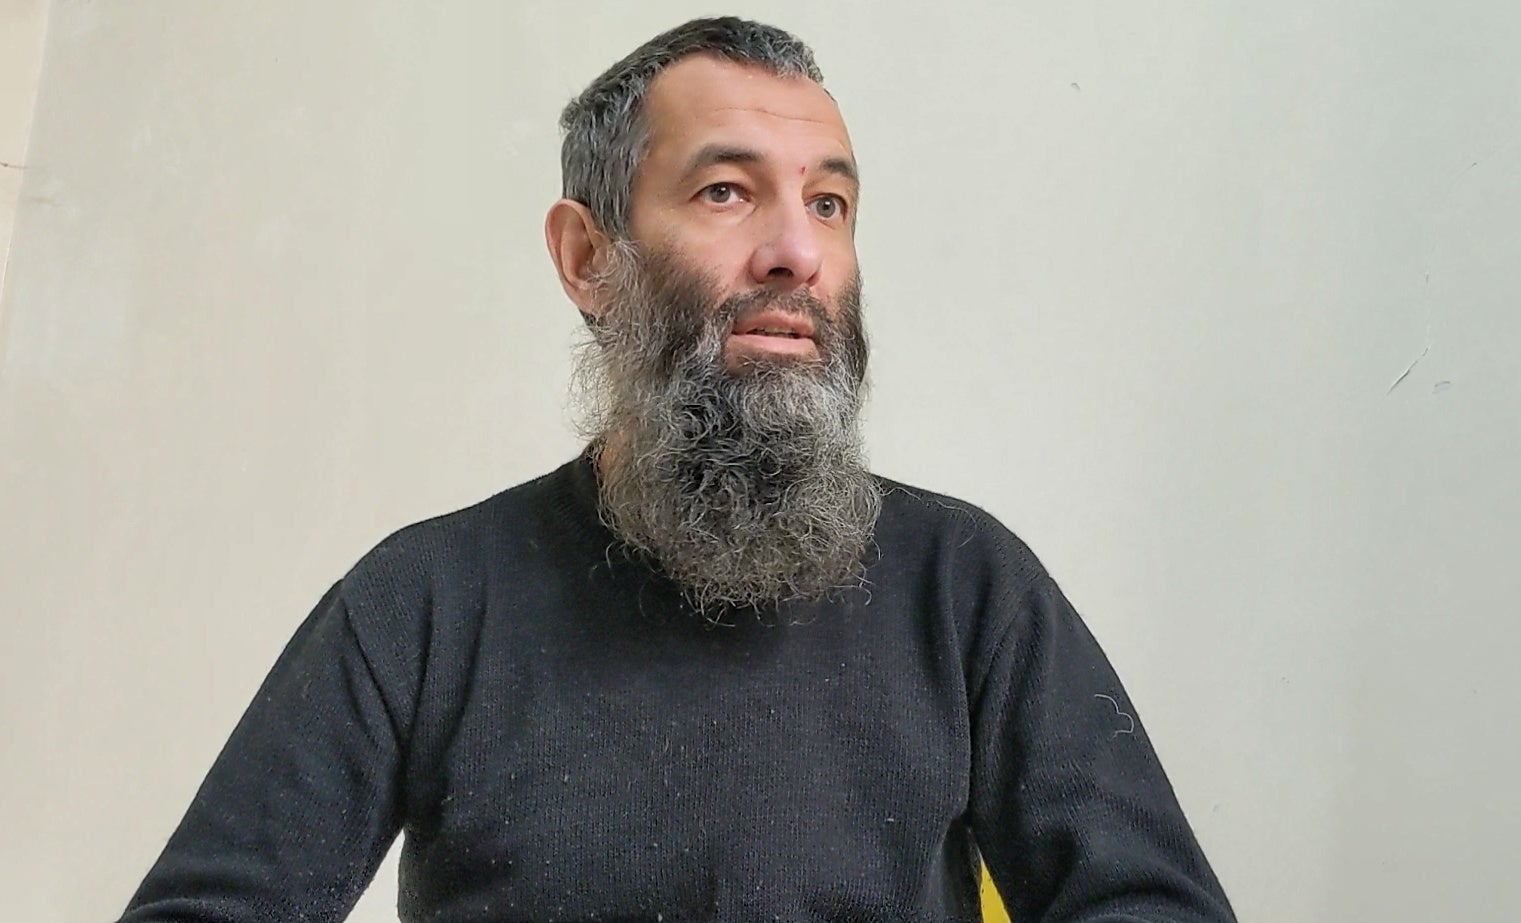 Alexandr Bekmirzaev, 45, during an interview with The Independent in northern Syria.